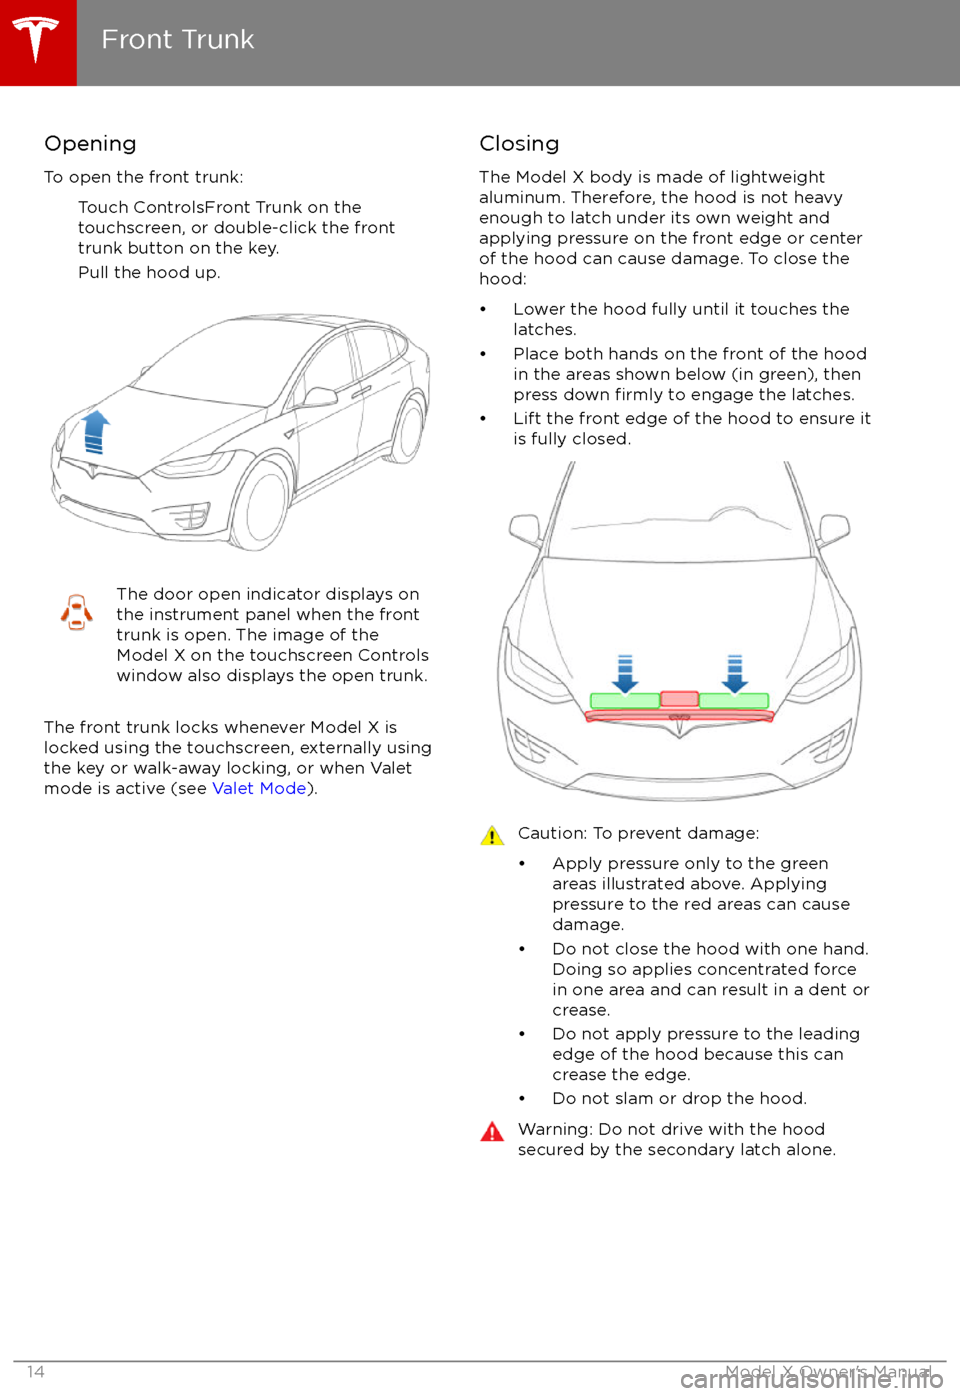 TESLA MODEL X 2017  Owners Manual  Opening
To open the front trunk: Touch ControlsFront Trunk on the
touchscreen, or double-click the front
trunk button on the key.
Pull the hood up.The door open indicator displays on
the instrument pa